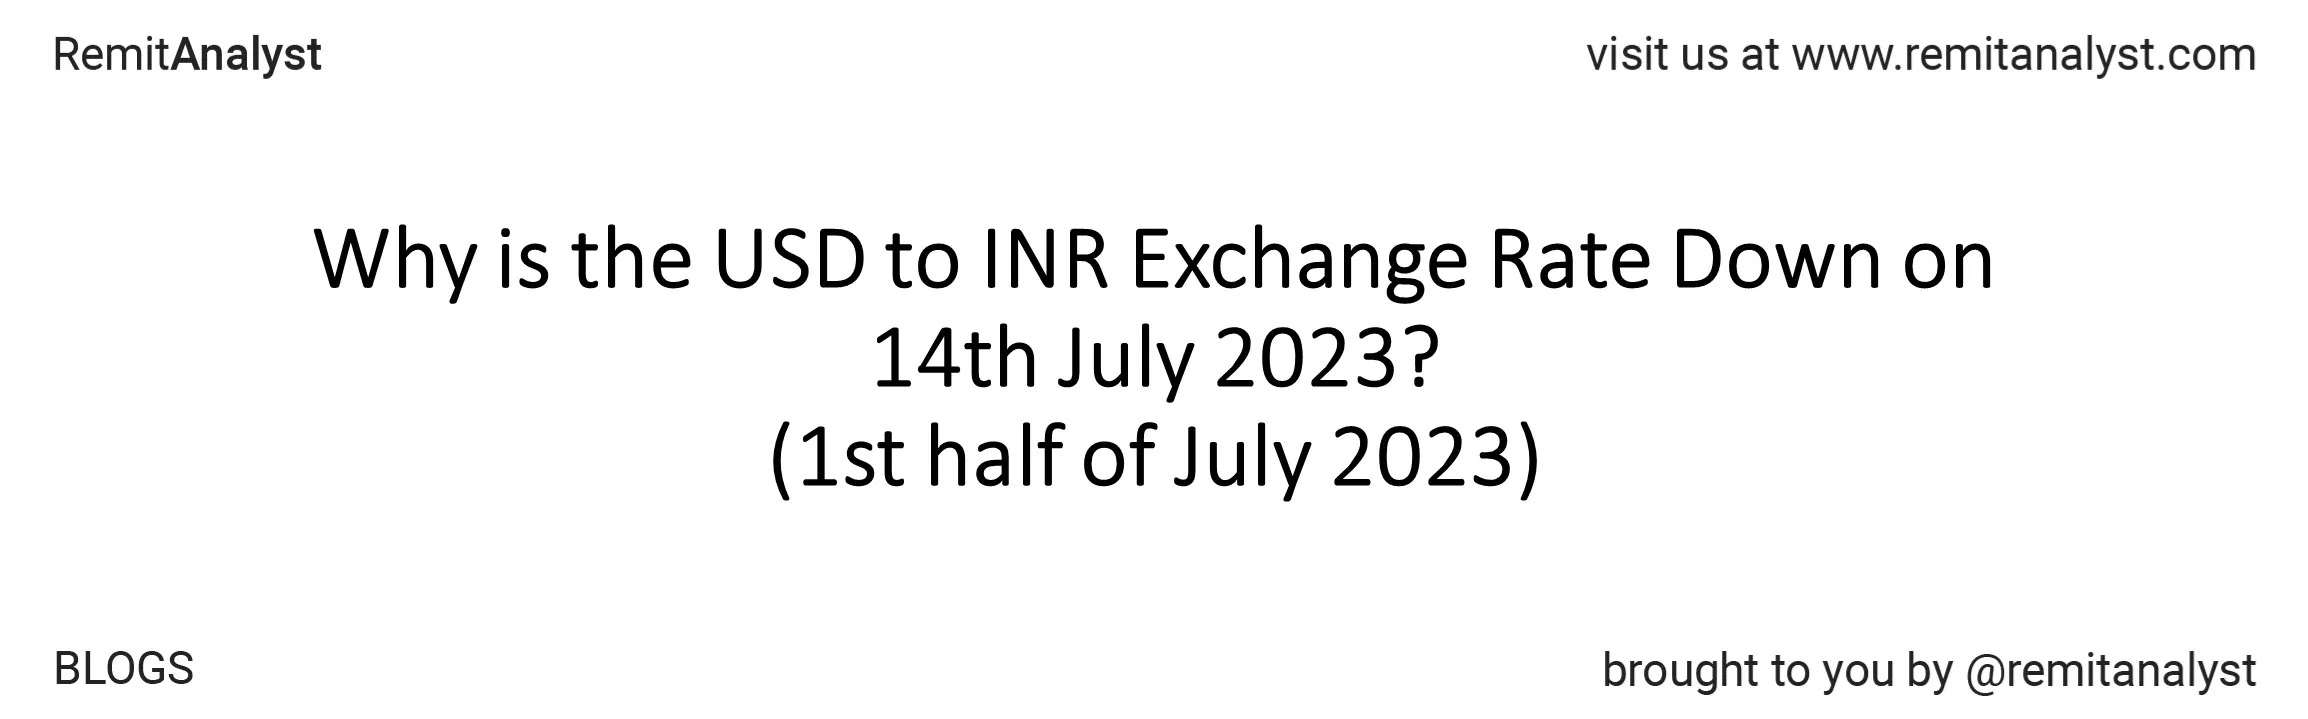 usd-to-inr-exchange-rate-3-jul-2023-to-14-jul-2023-title